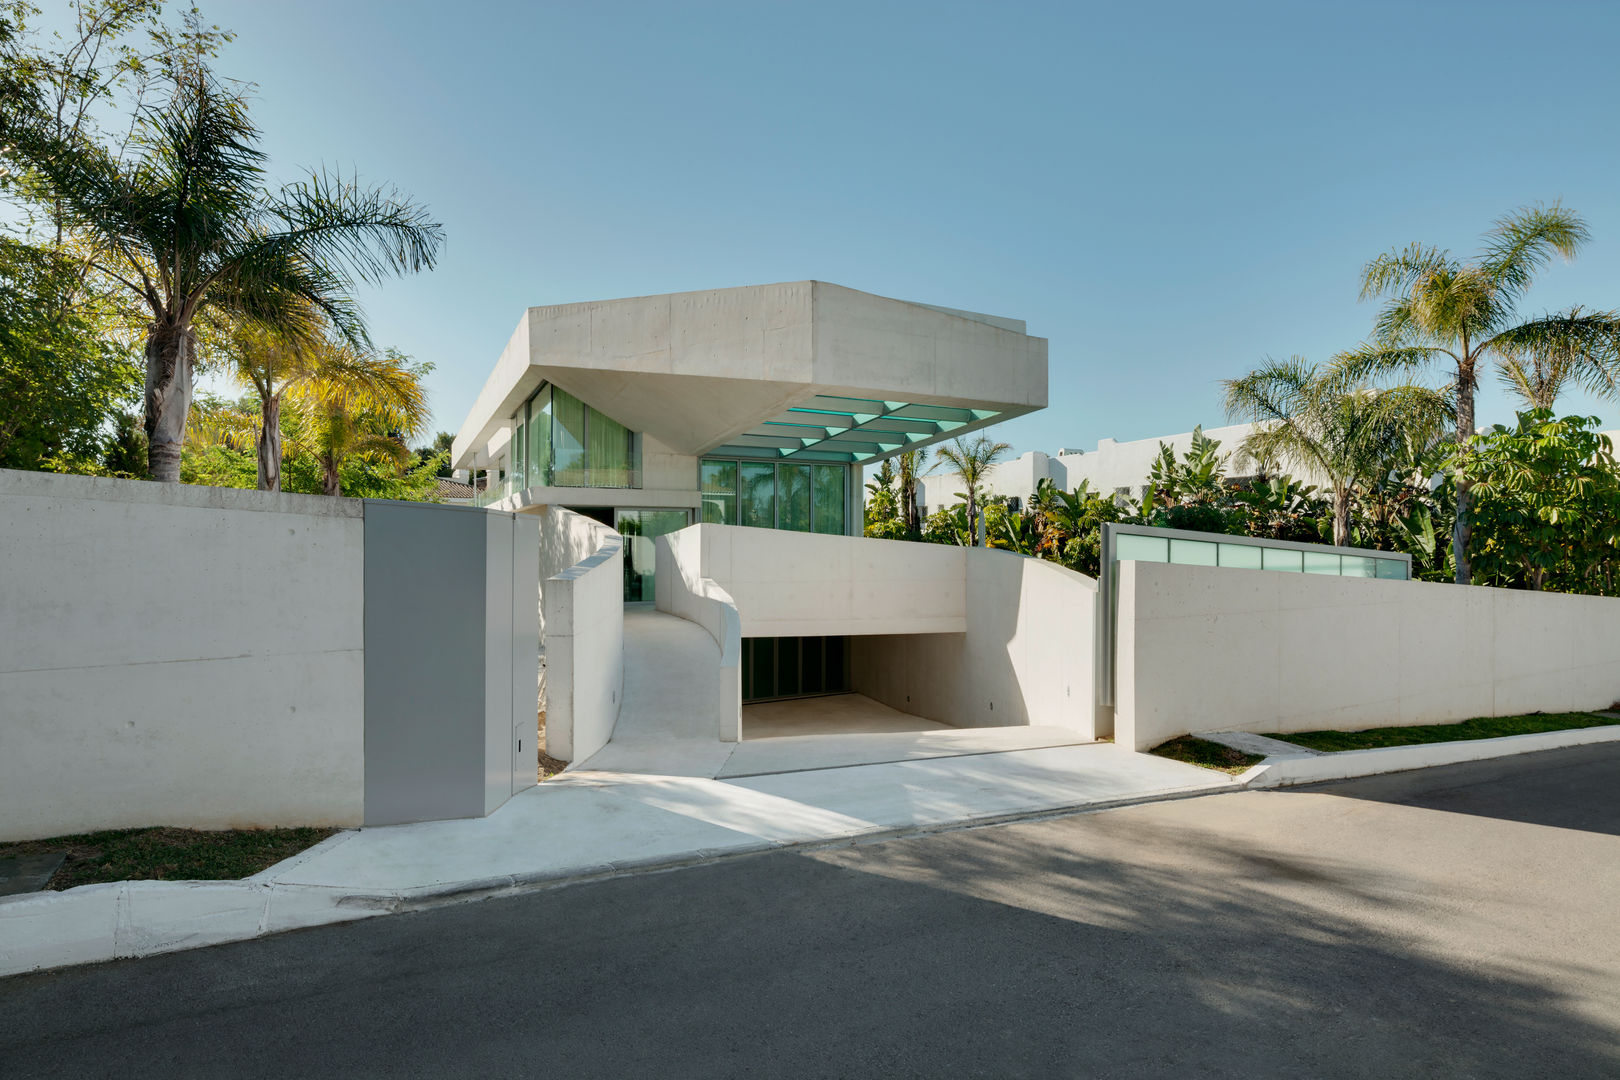 Jellyfish House, Wiel Arets Architects Wiel Arets Architects Rumah Modern